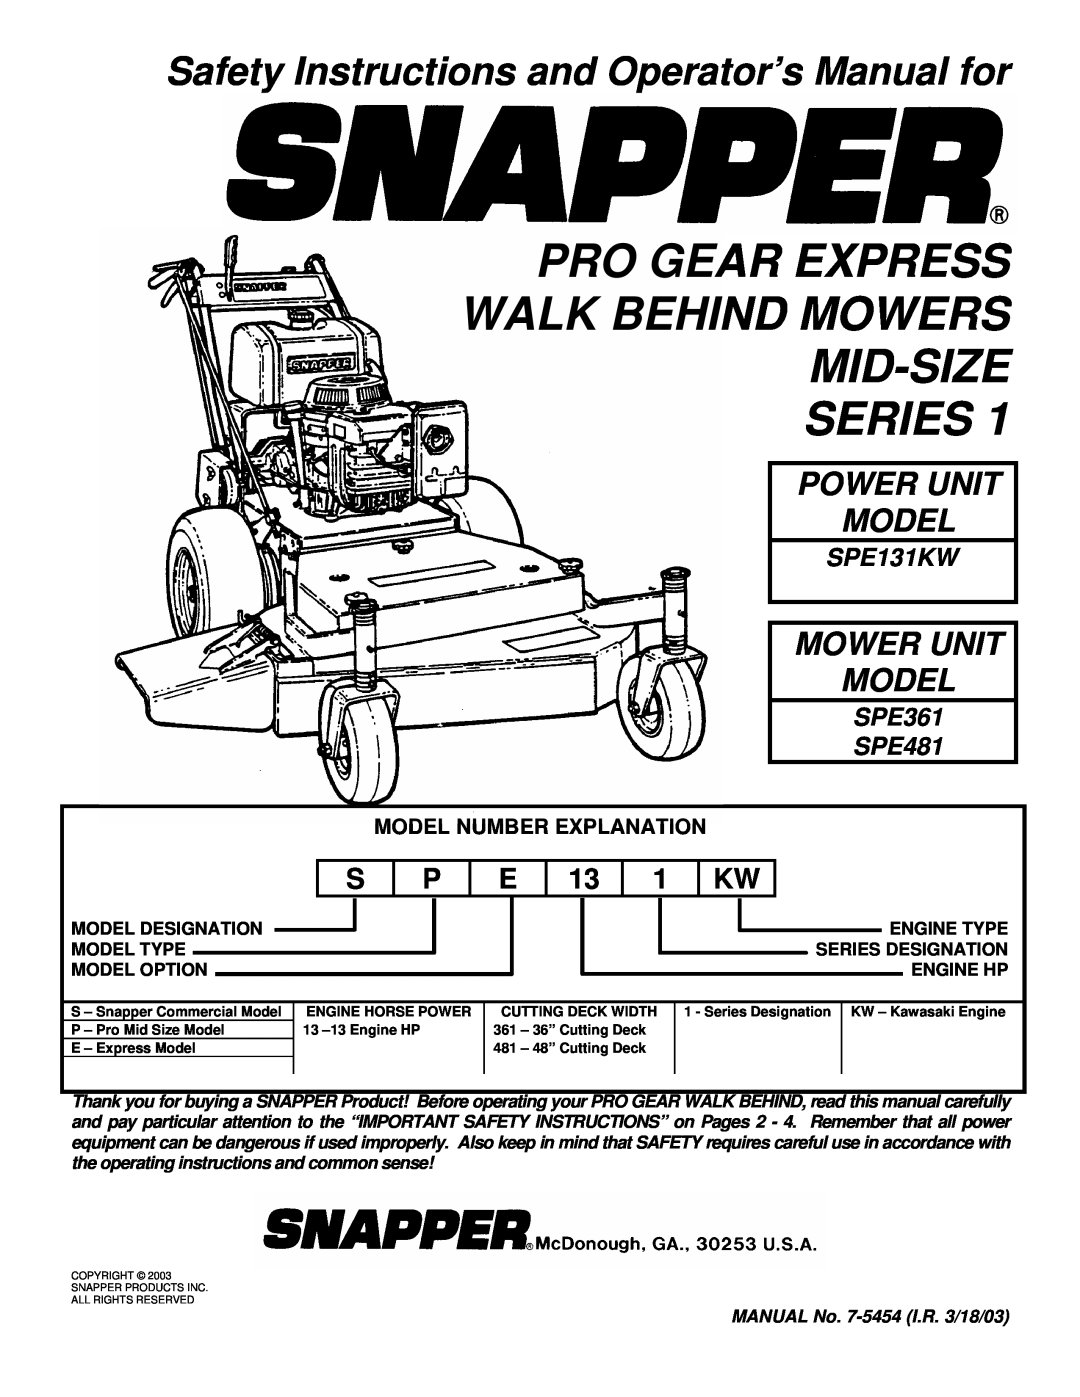 Snapper SPE131KW, SPE361, SPE481 important safety instructions Pro Gear Express Walk Behind Mowers Mid-Size Series 